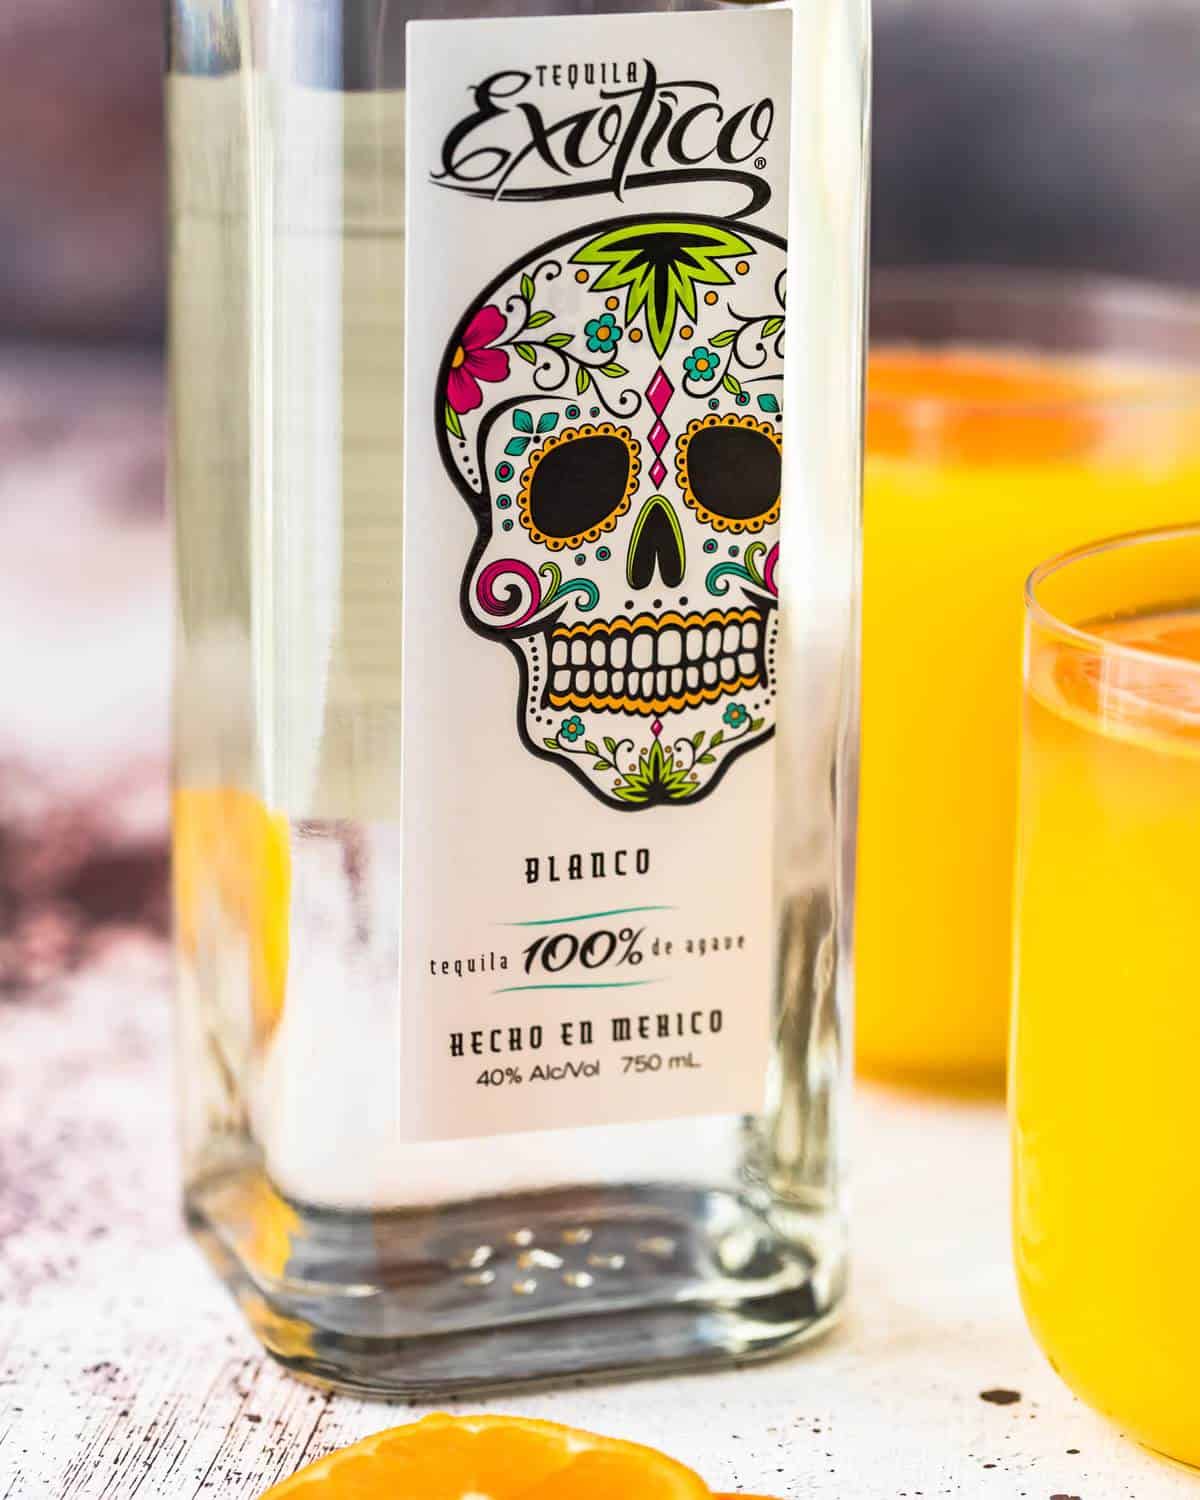 close up view of Exotico Tequila label